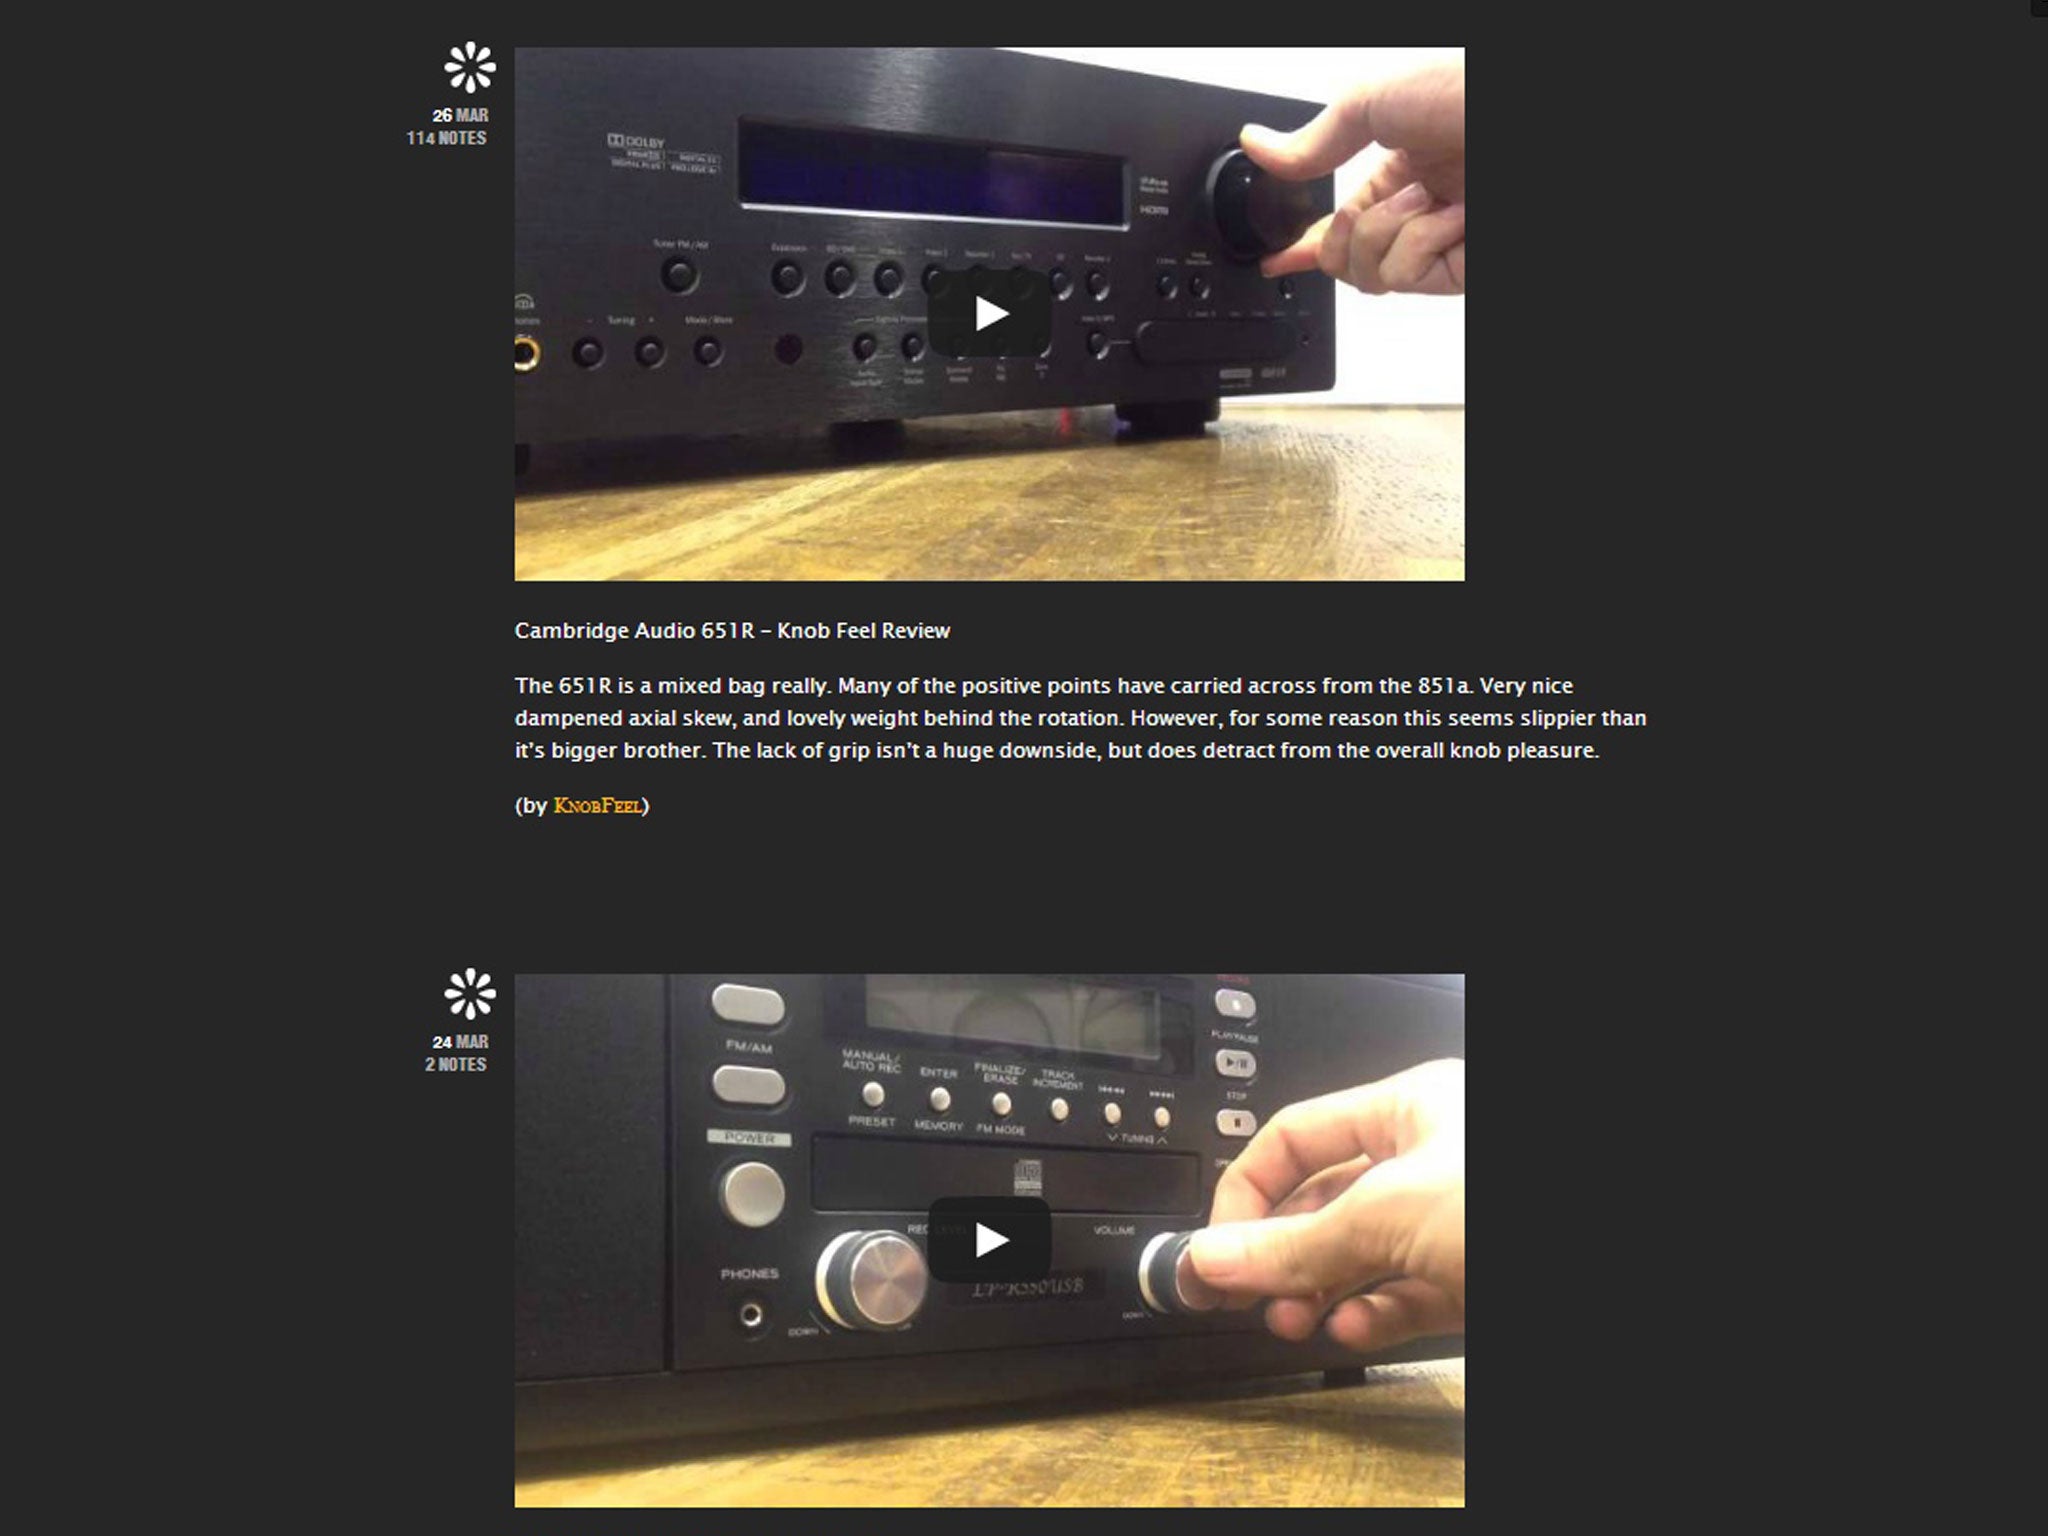 Knobfeel screenshots; “reviews based purely on the feel of a knob”